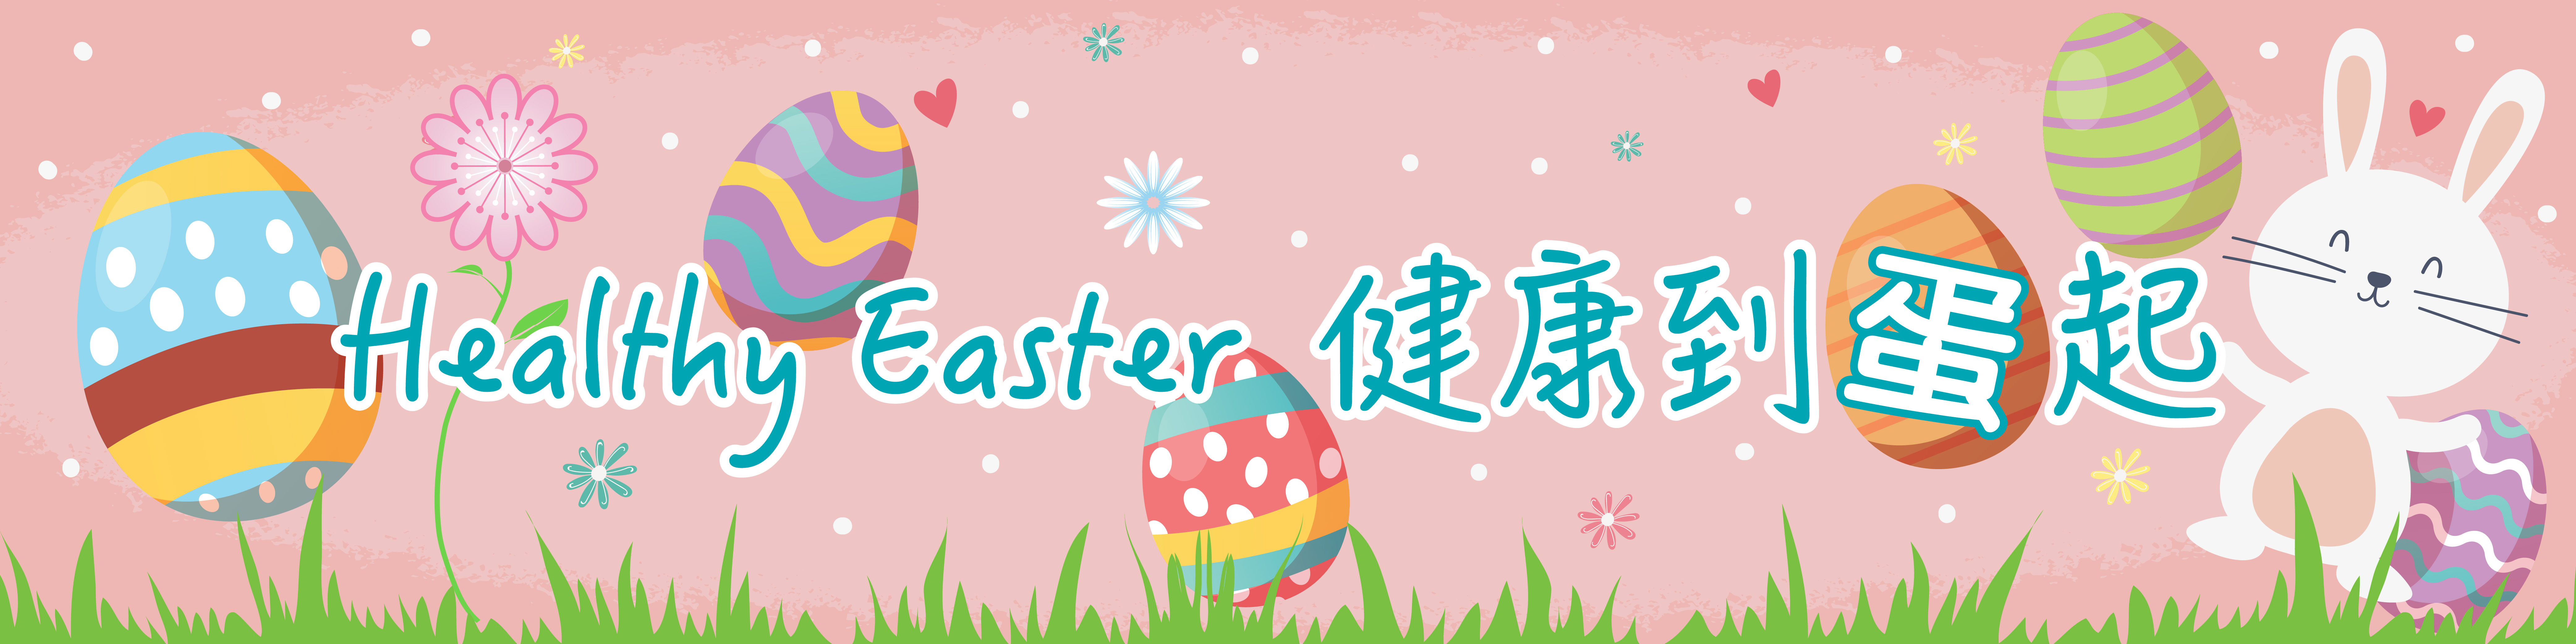 Healthy Easter 健康到蛋起